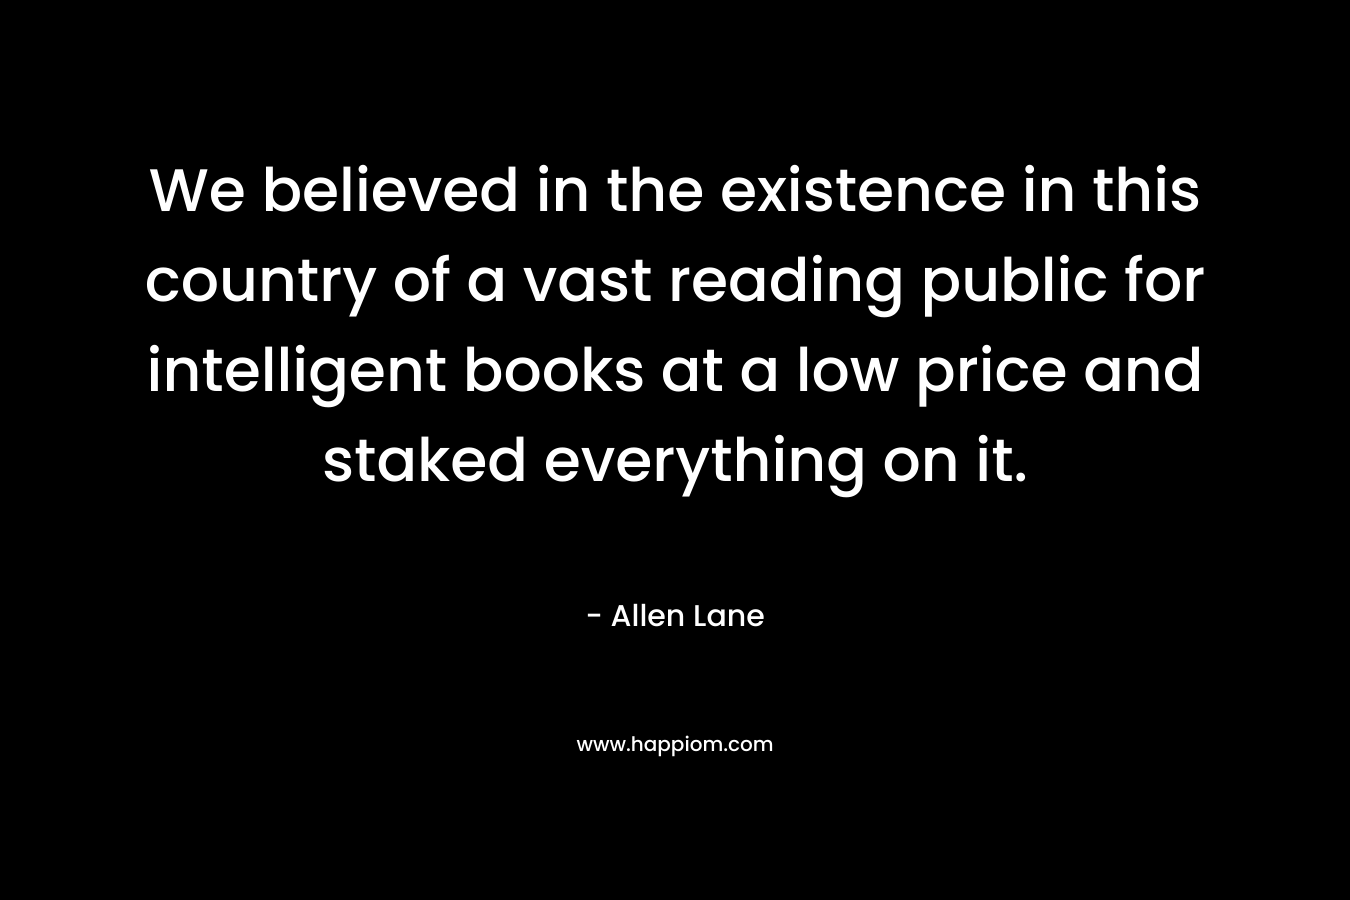 We believed in the existence in this country of a vast reading public for intelligent books at a low price and staked everything on it.